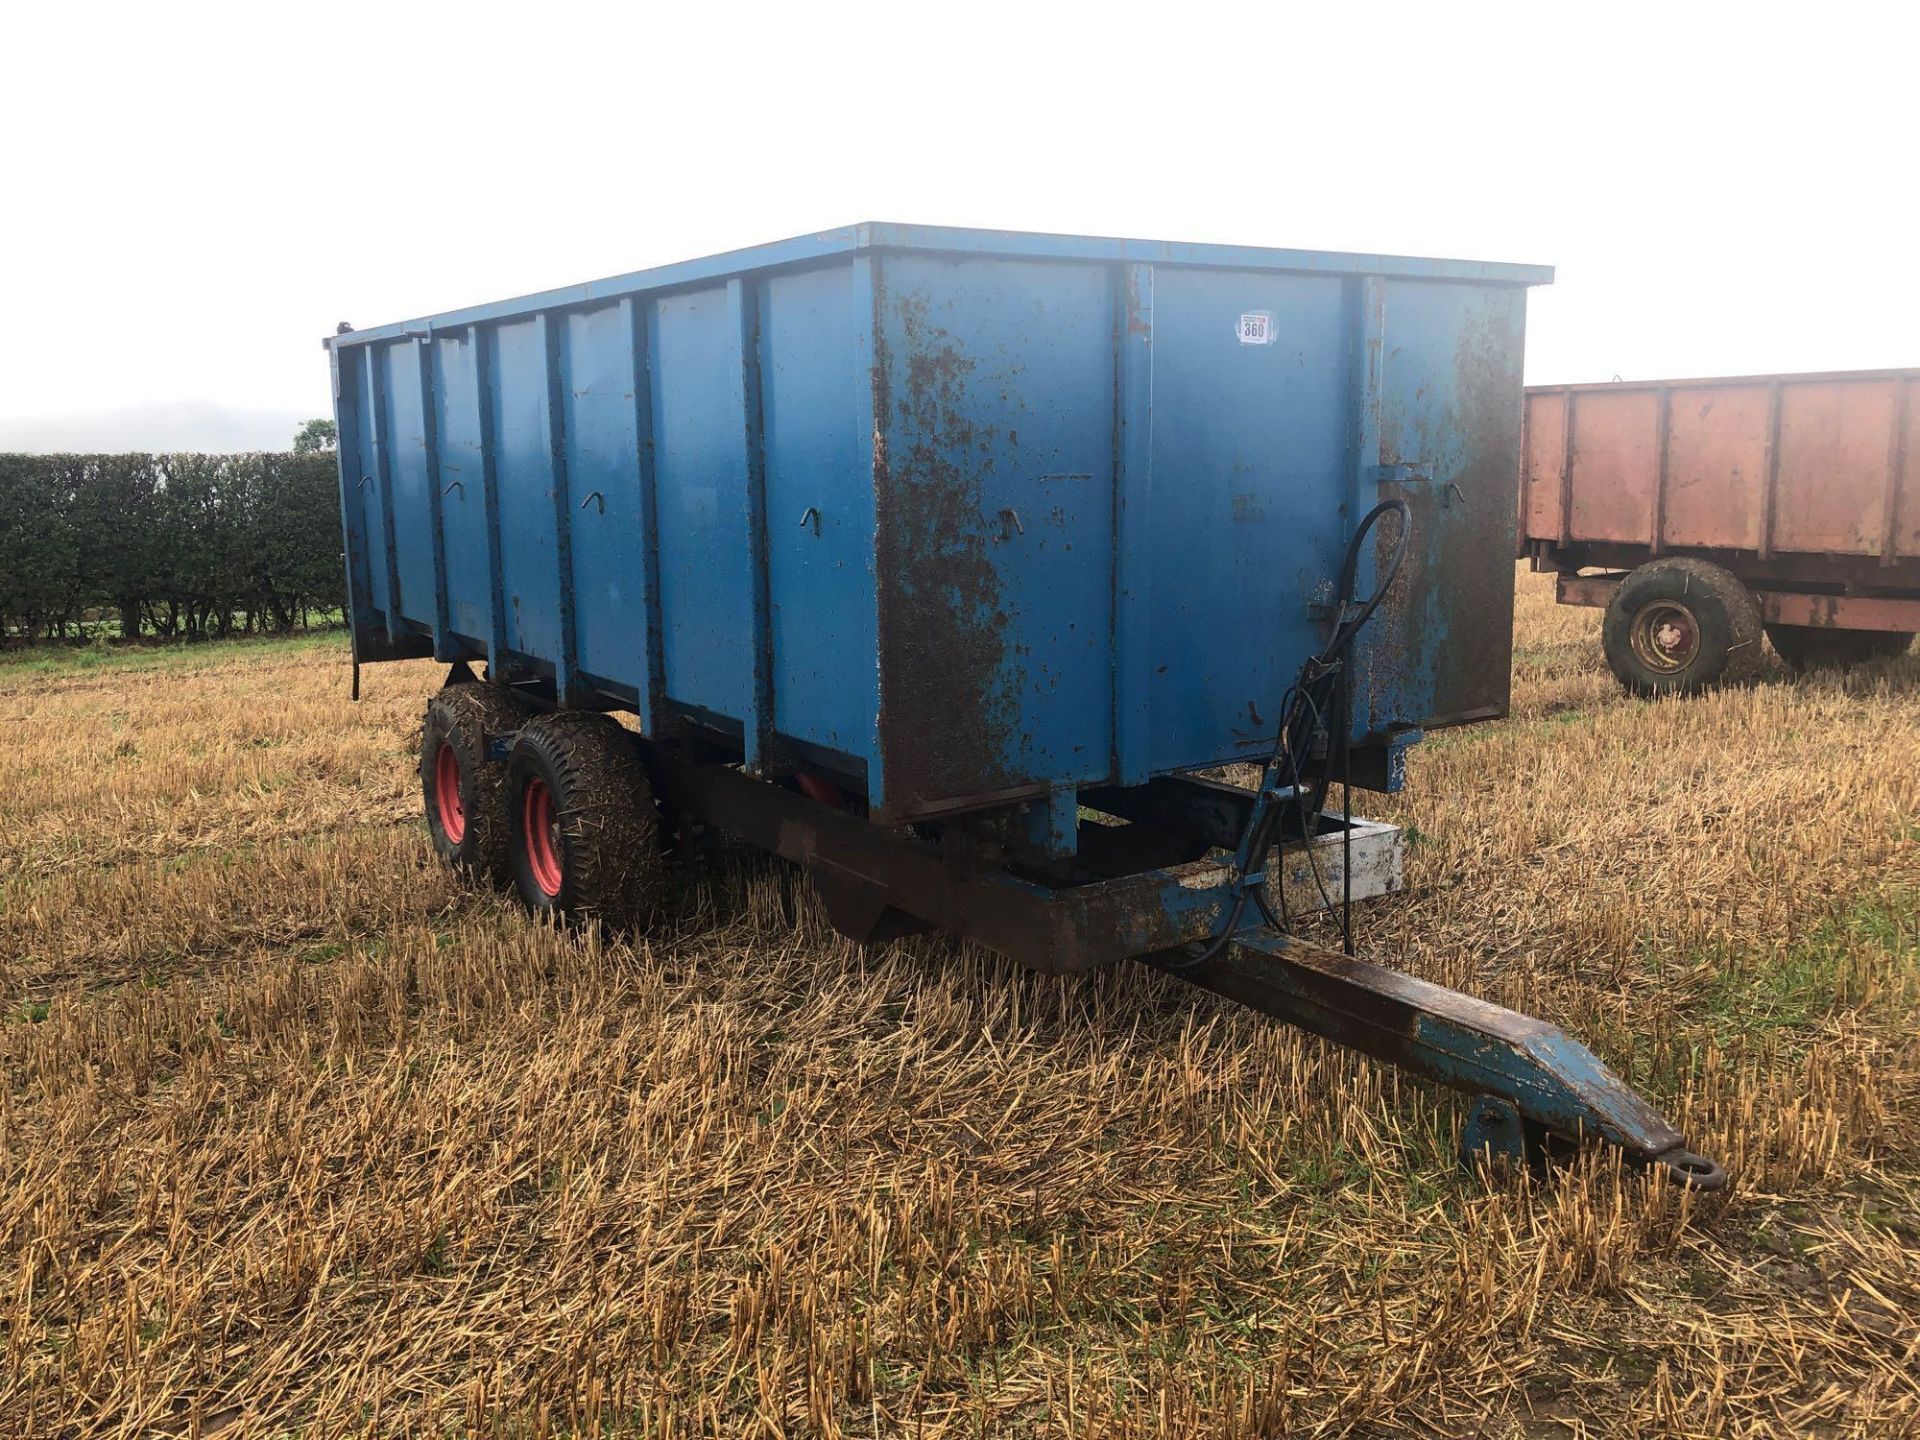 8t twin axle trailer with manual rear door and grain chute. C/w silage sides. On 12.5/80-15.3 wheels